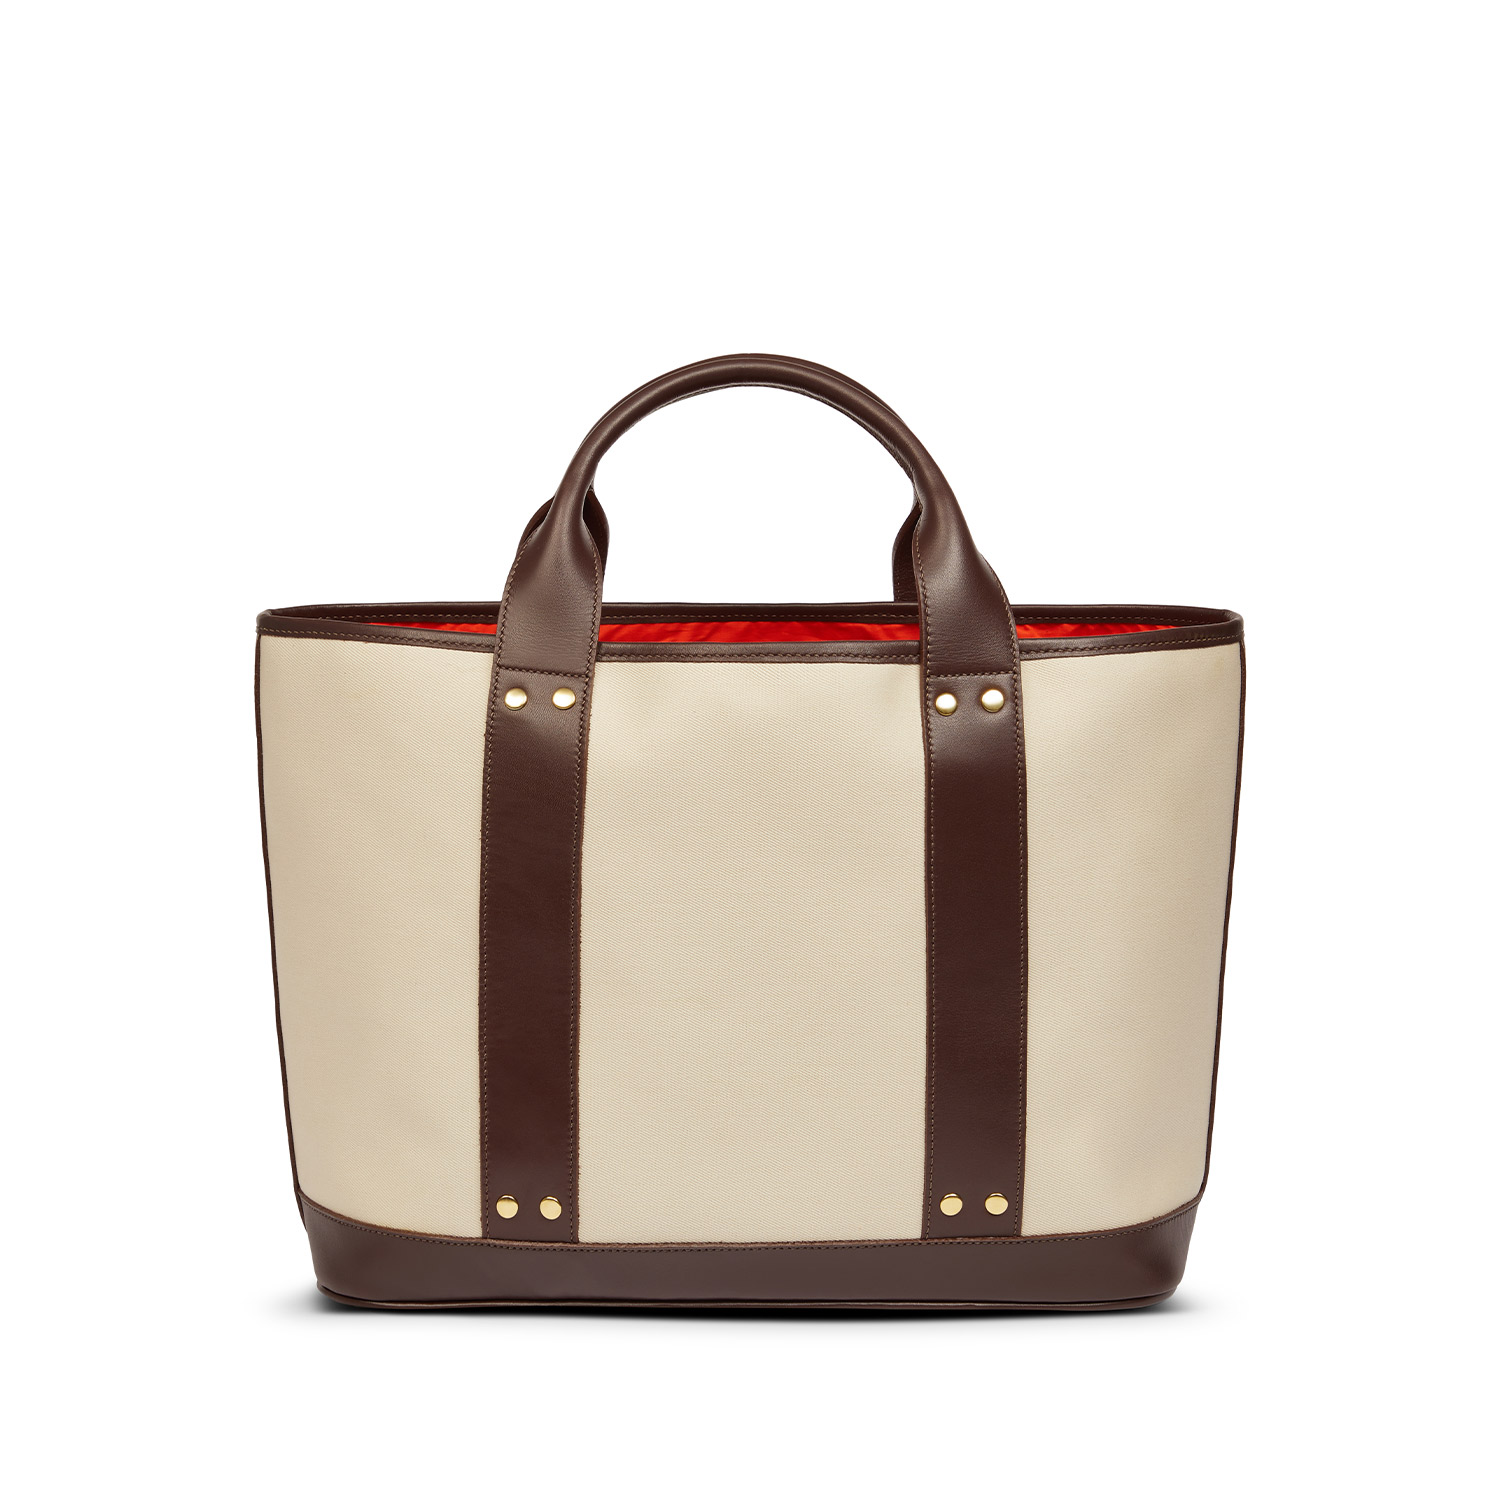 The Soleil Tote From The India Hicks + Tusting Collection